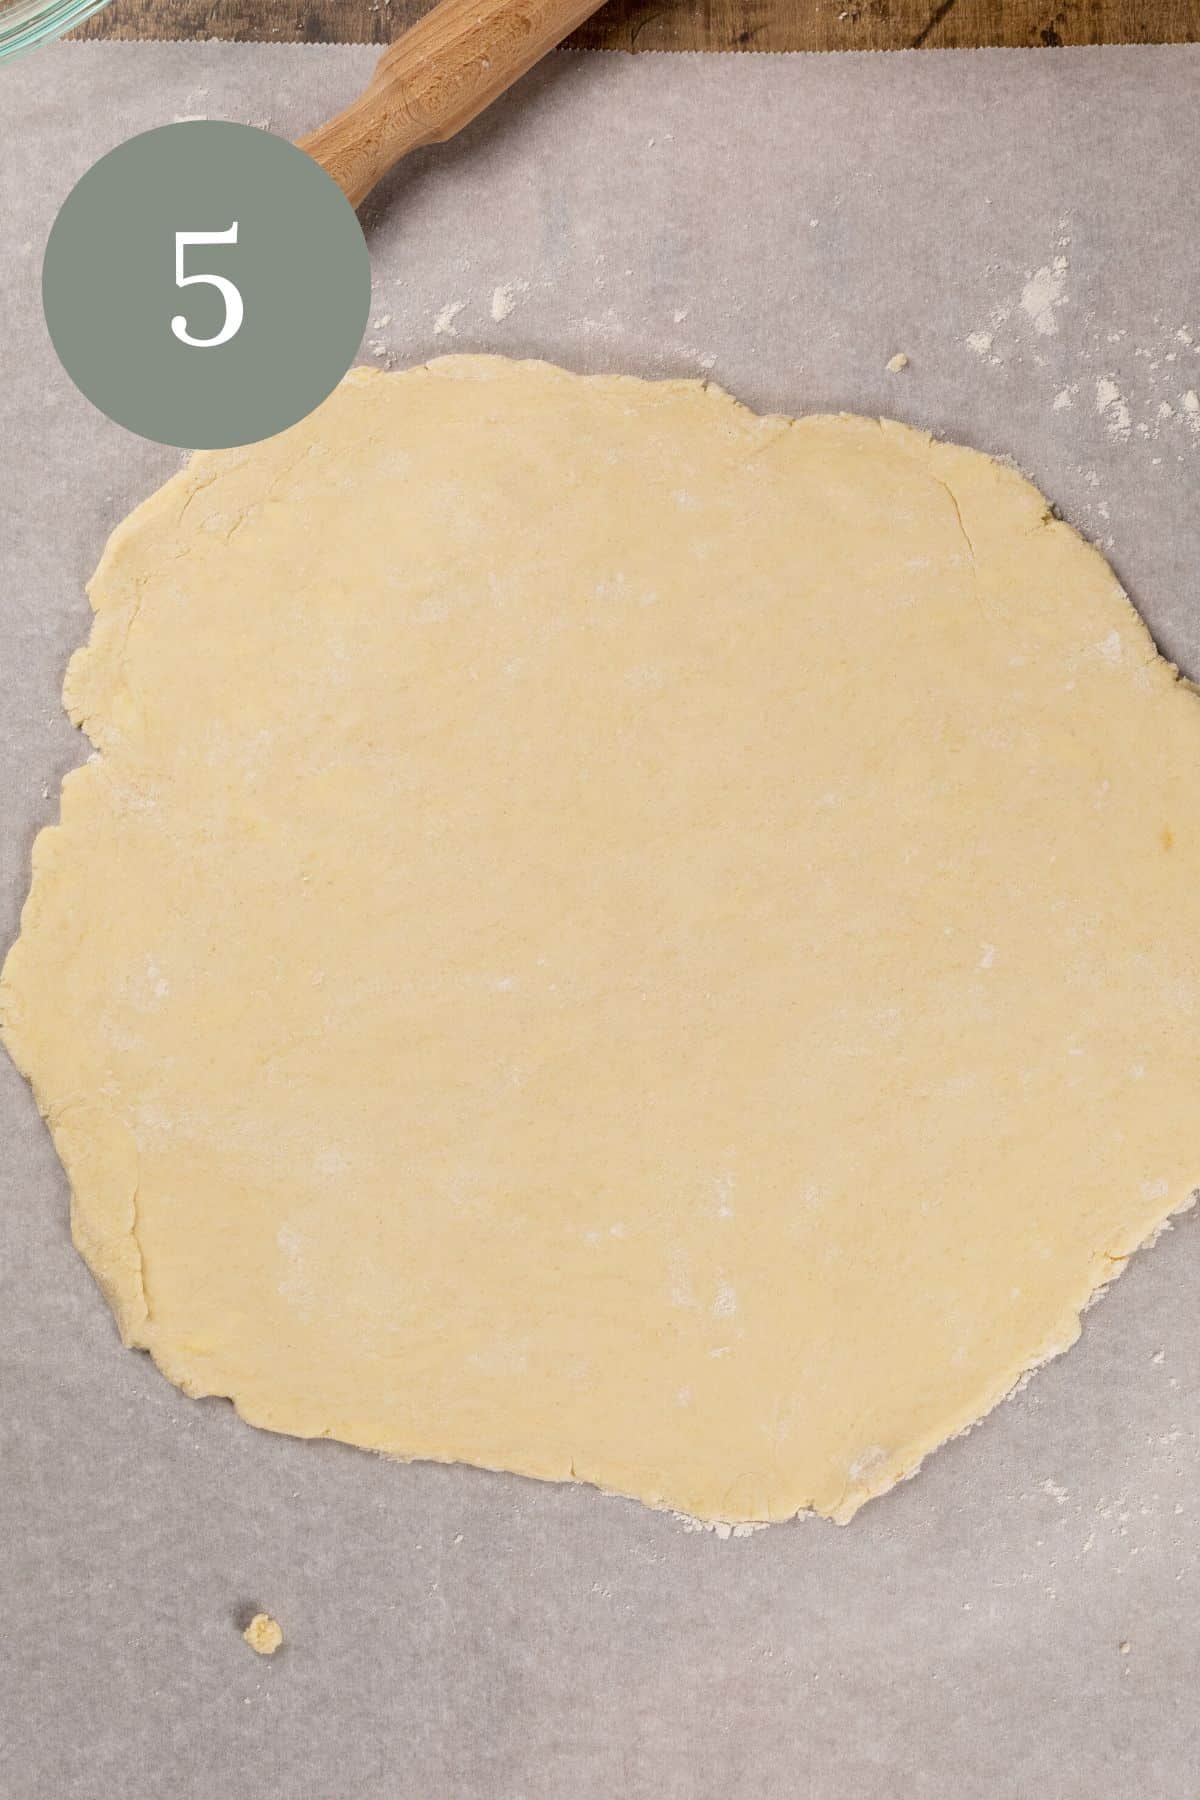 a smooth rolled out gluten free pie crust on a sheet of parchment paper. the rolling pin is just seen in the top edges. the number 5 is in the top left corner.